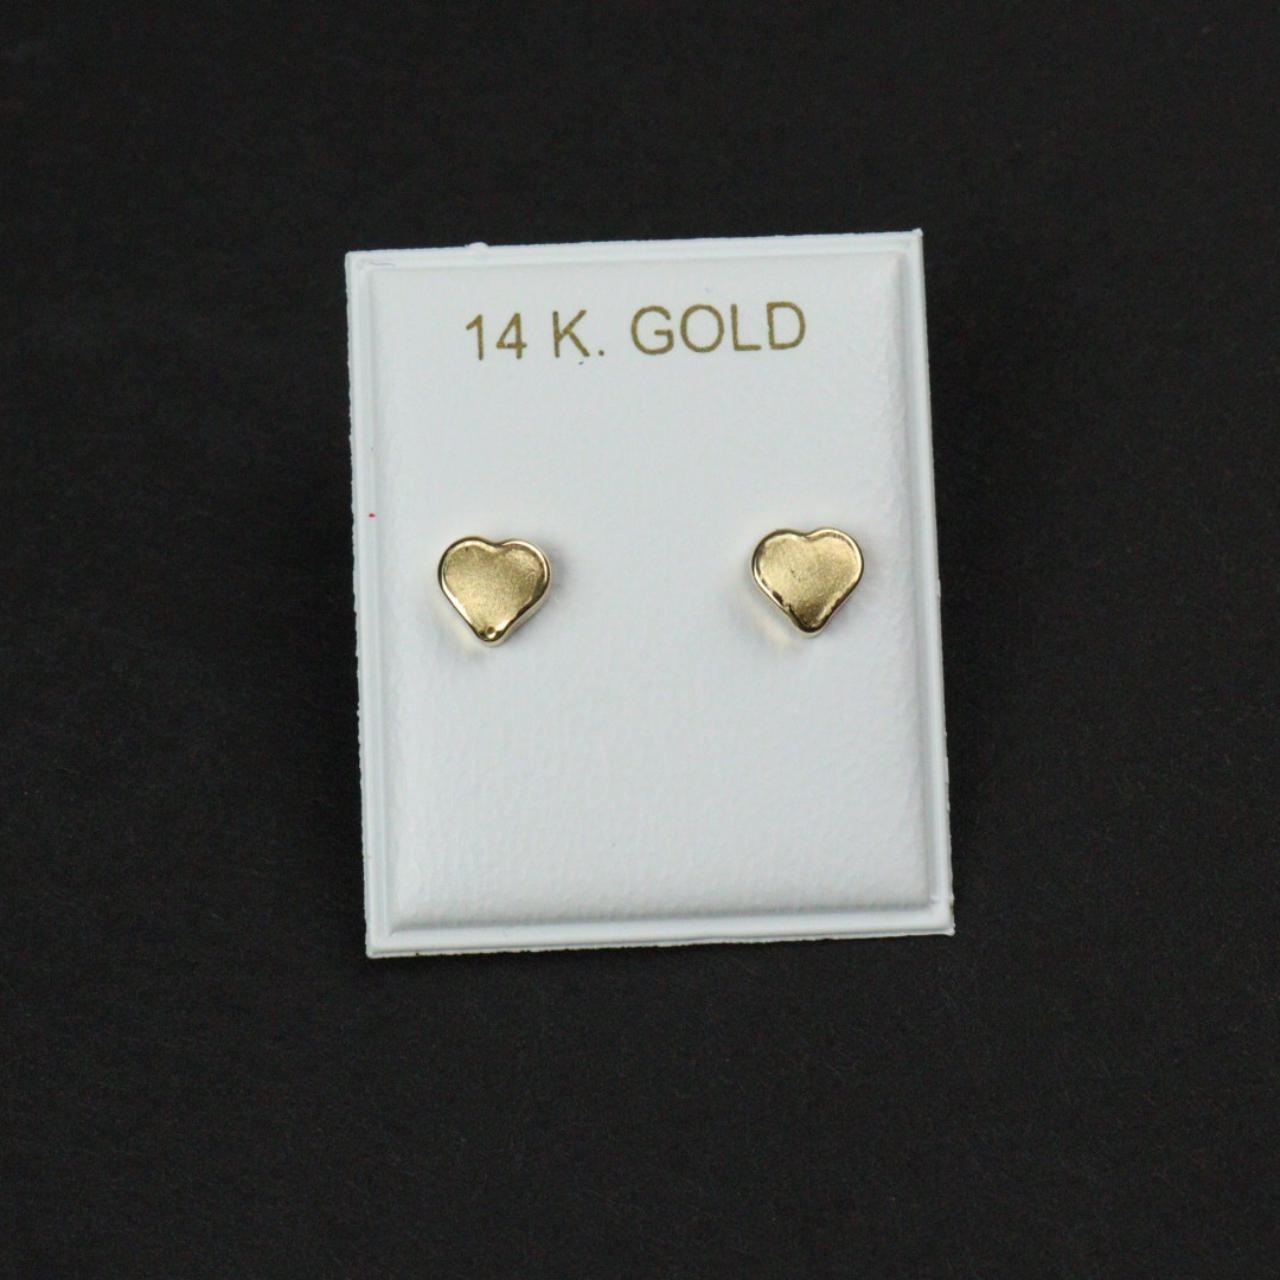 Product Image 1 - Heart shaped 14k solid gold